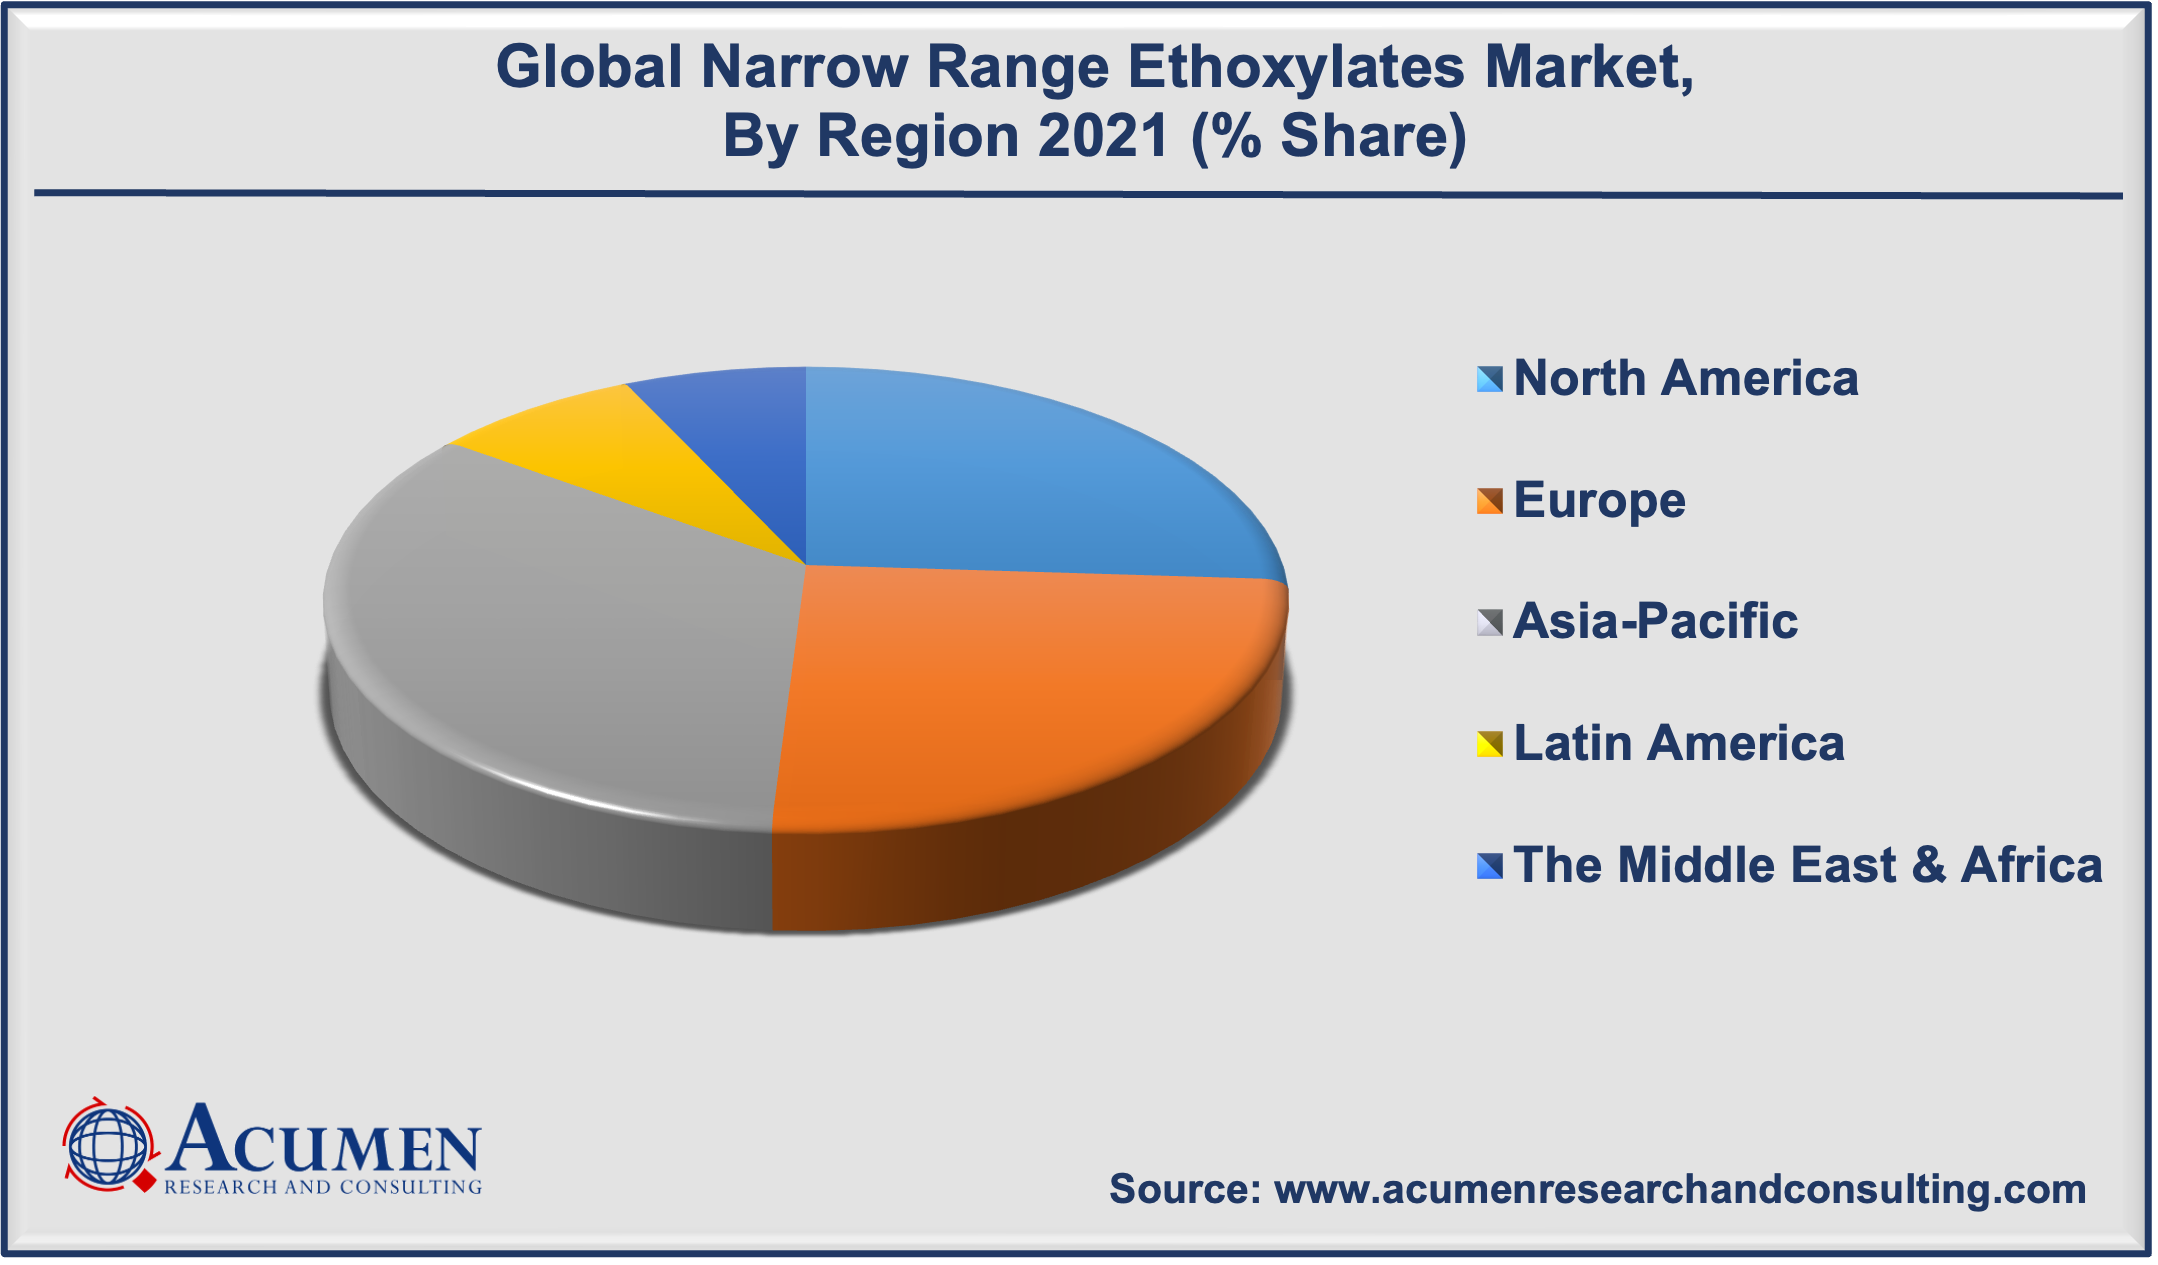 Narrow Range Ethoxylates Market Analysis accounted for USD 4,488 Million in 2021 and is estimated to reach USD 10,084 Million by 2030.